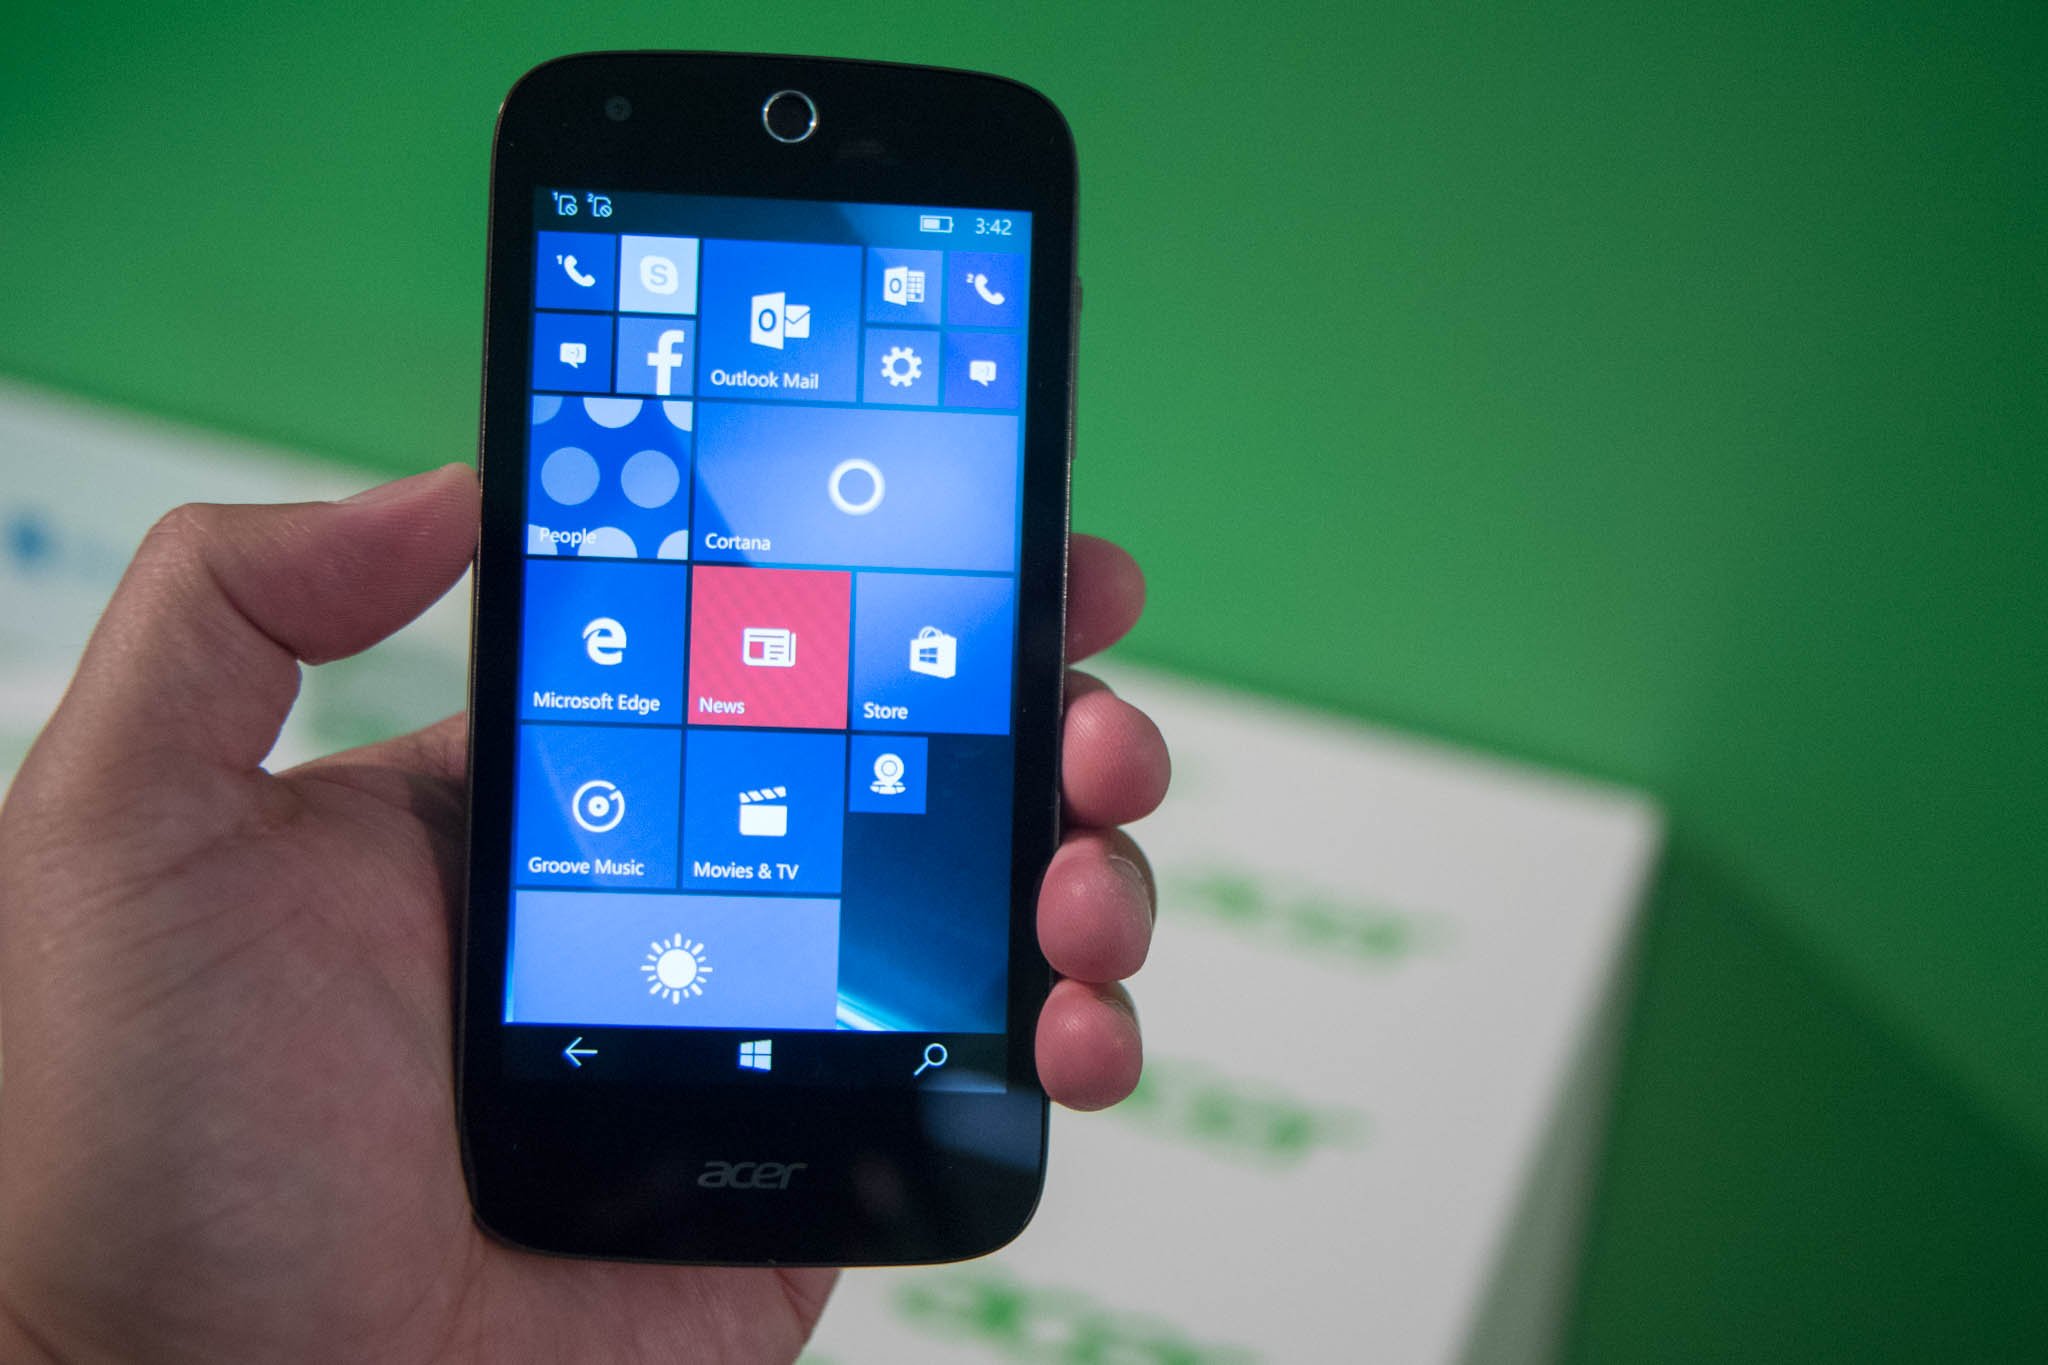 ... M330 with Windows 10 Mobile is launching this month | Windows Central